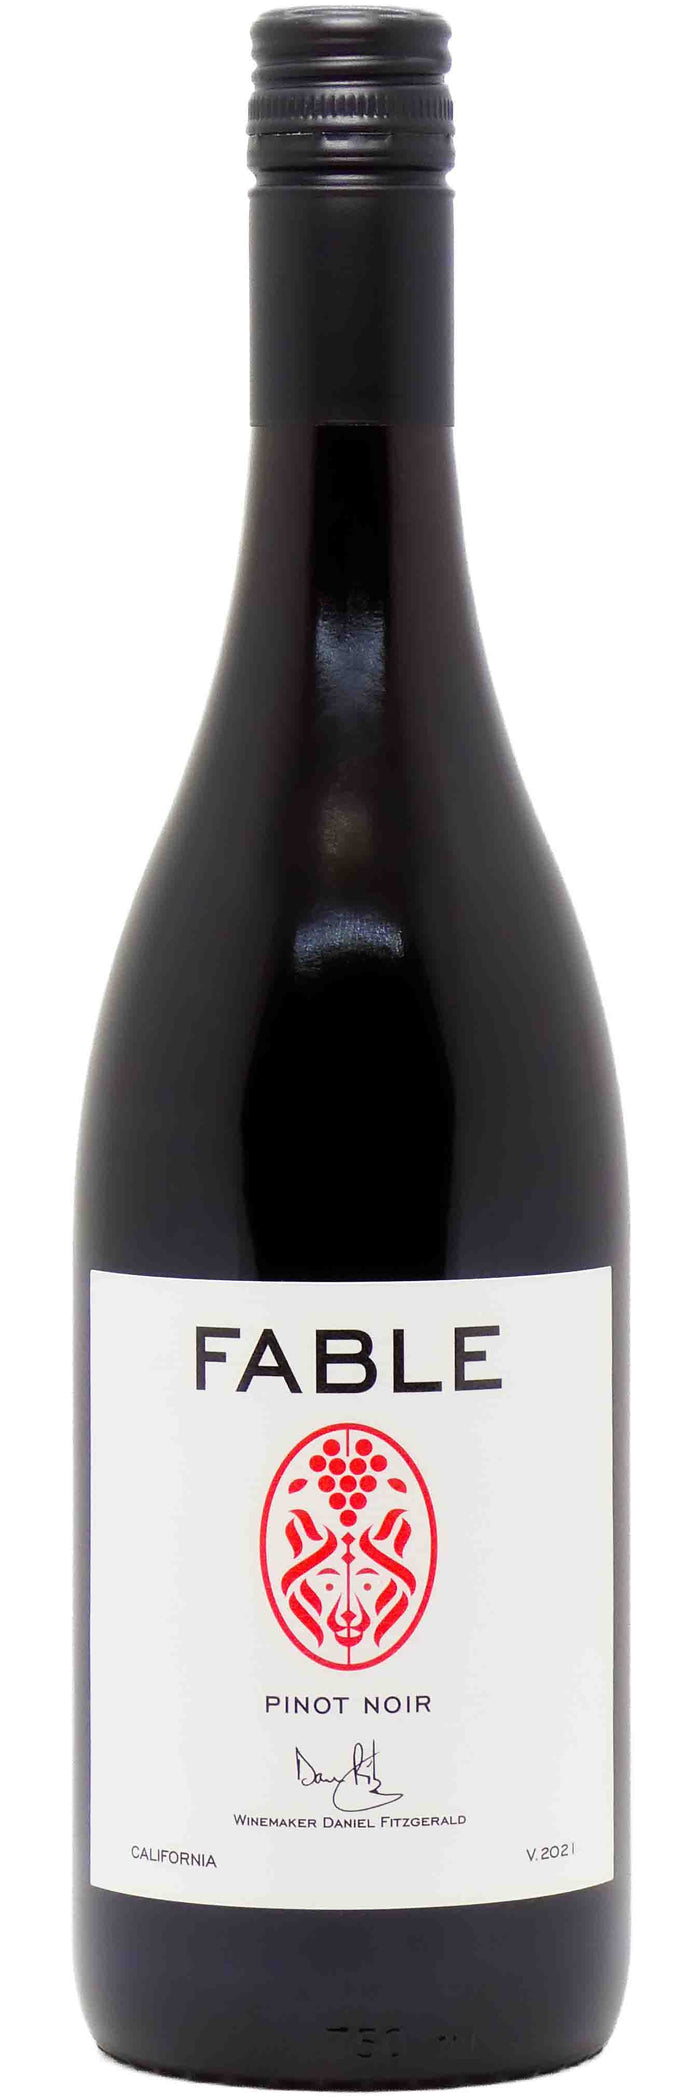 Fable Pinot Noir 2021